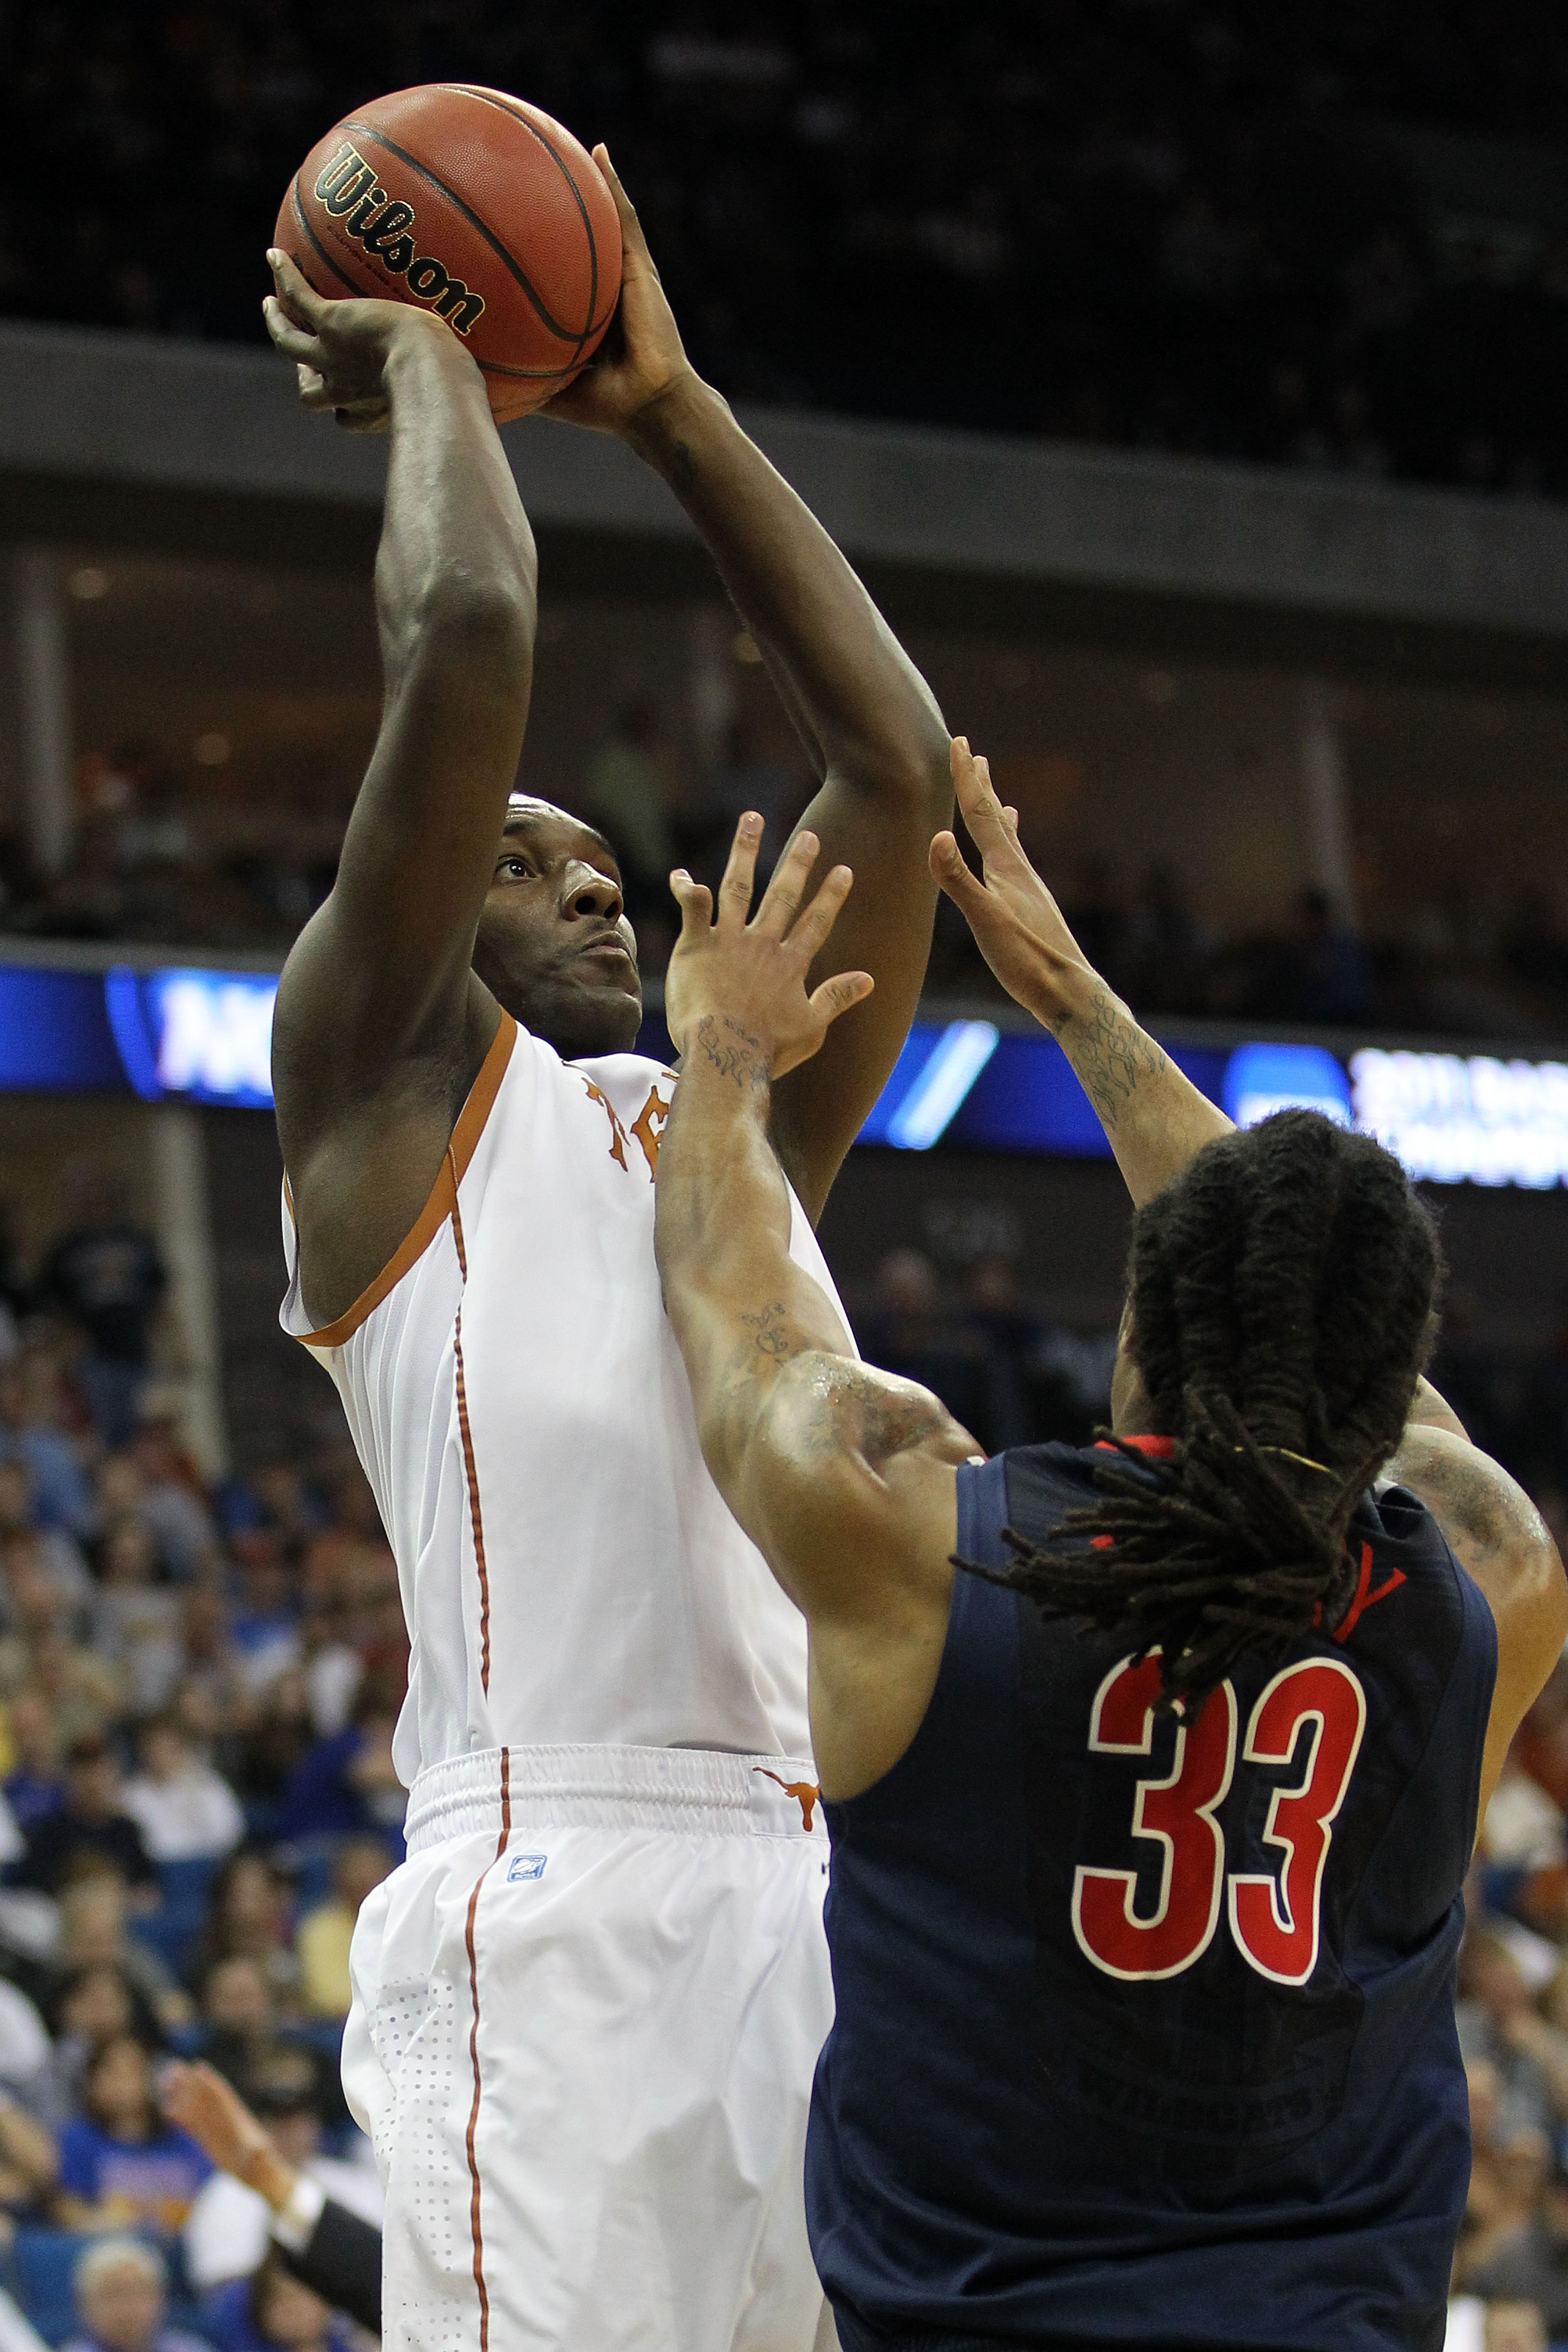 TULSA, OK - MARCH 20:  Jordan Hamilton #3 of the Texas Longhorns goes up for a shot against Jesse Perry #33 of the Arizona Wildcats during the third round of the 2011 NCAA men's basketball tournament at BOK Center on March 20, 2011 in Tulsa, Oklahoma.  (P